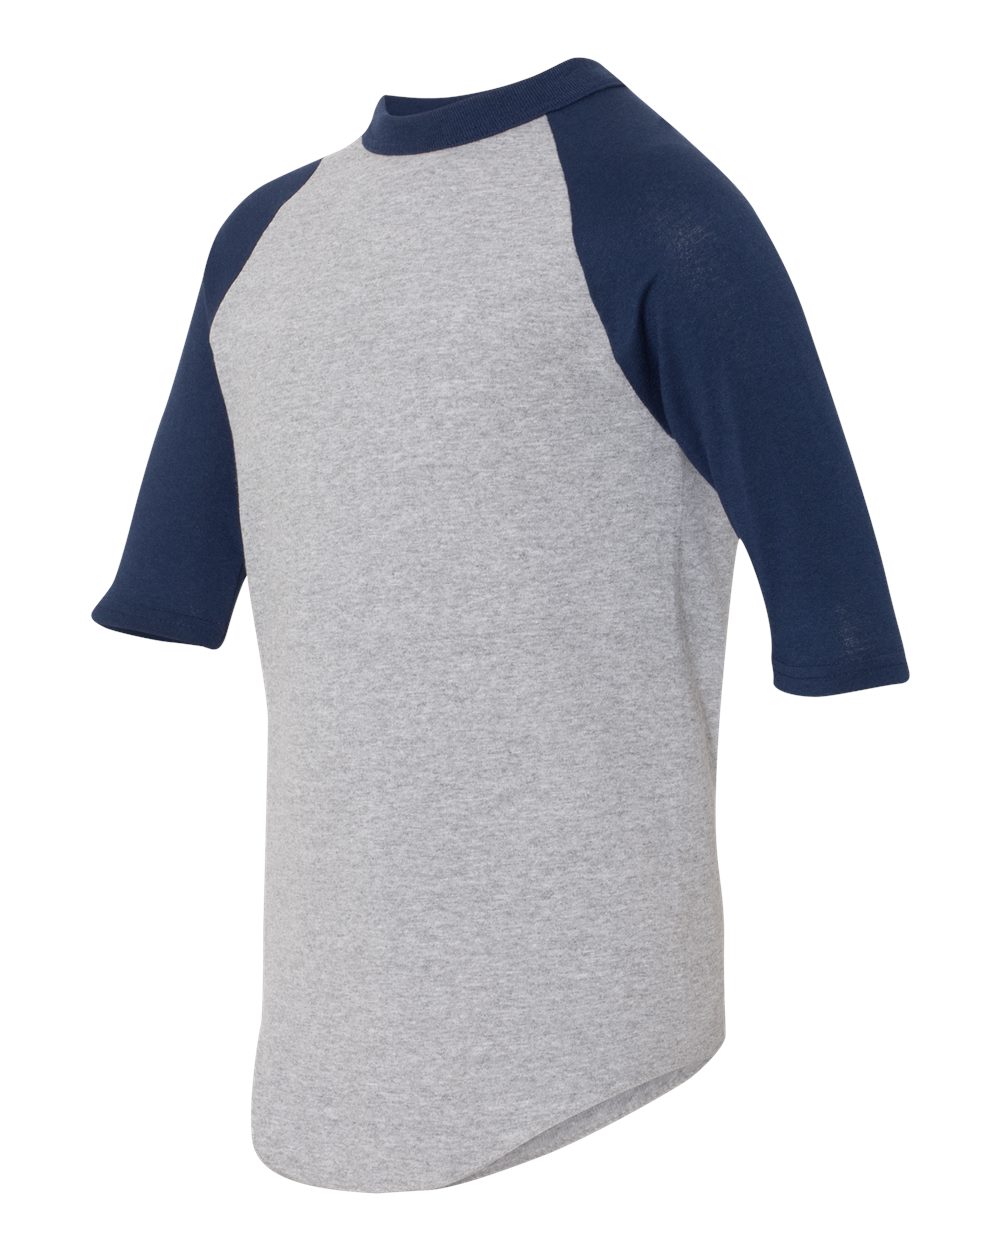 click to view Athletic Heather/ Navy